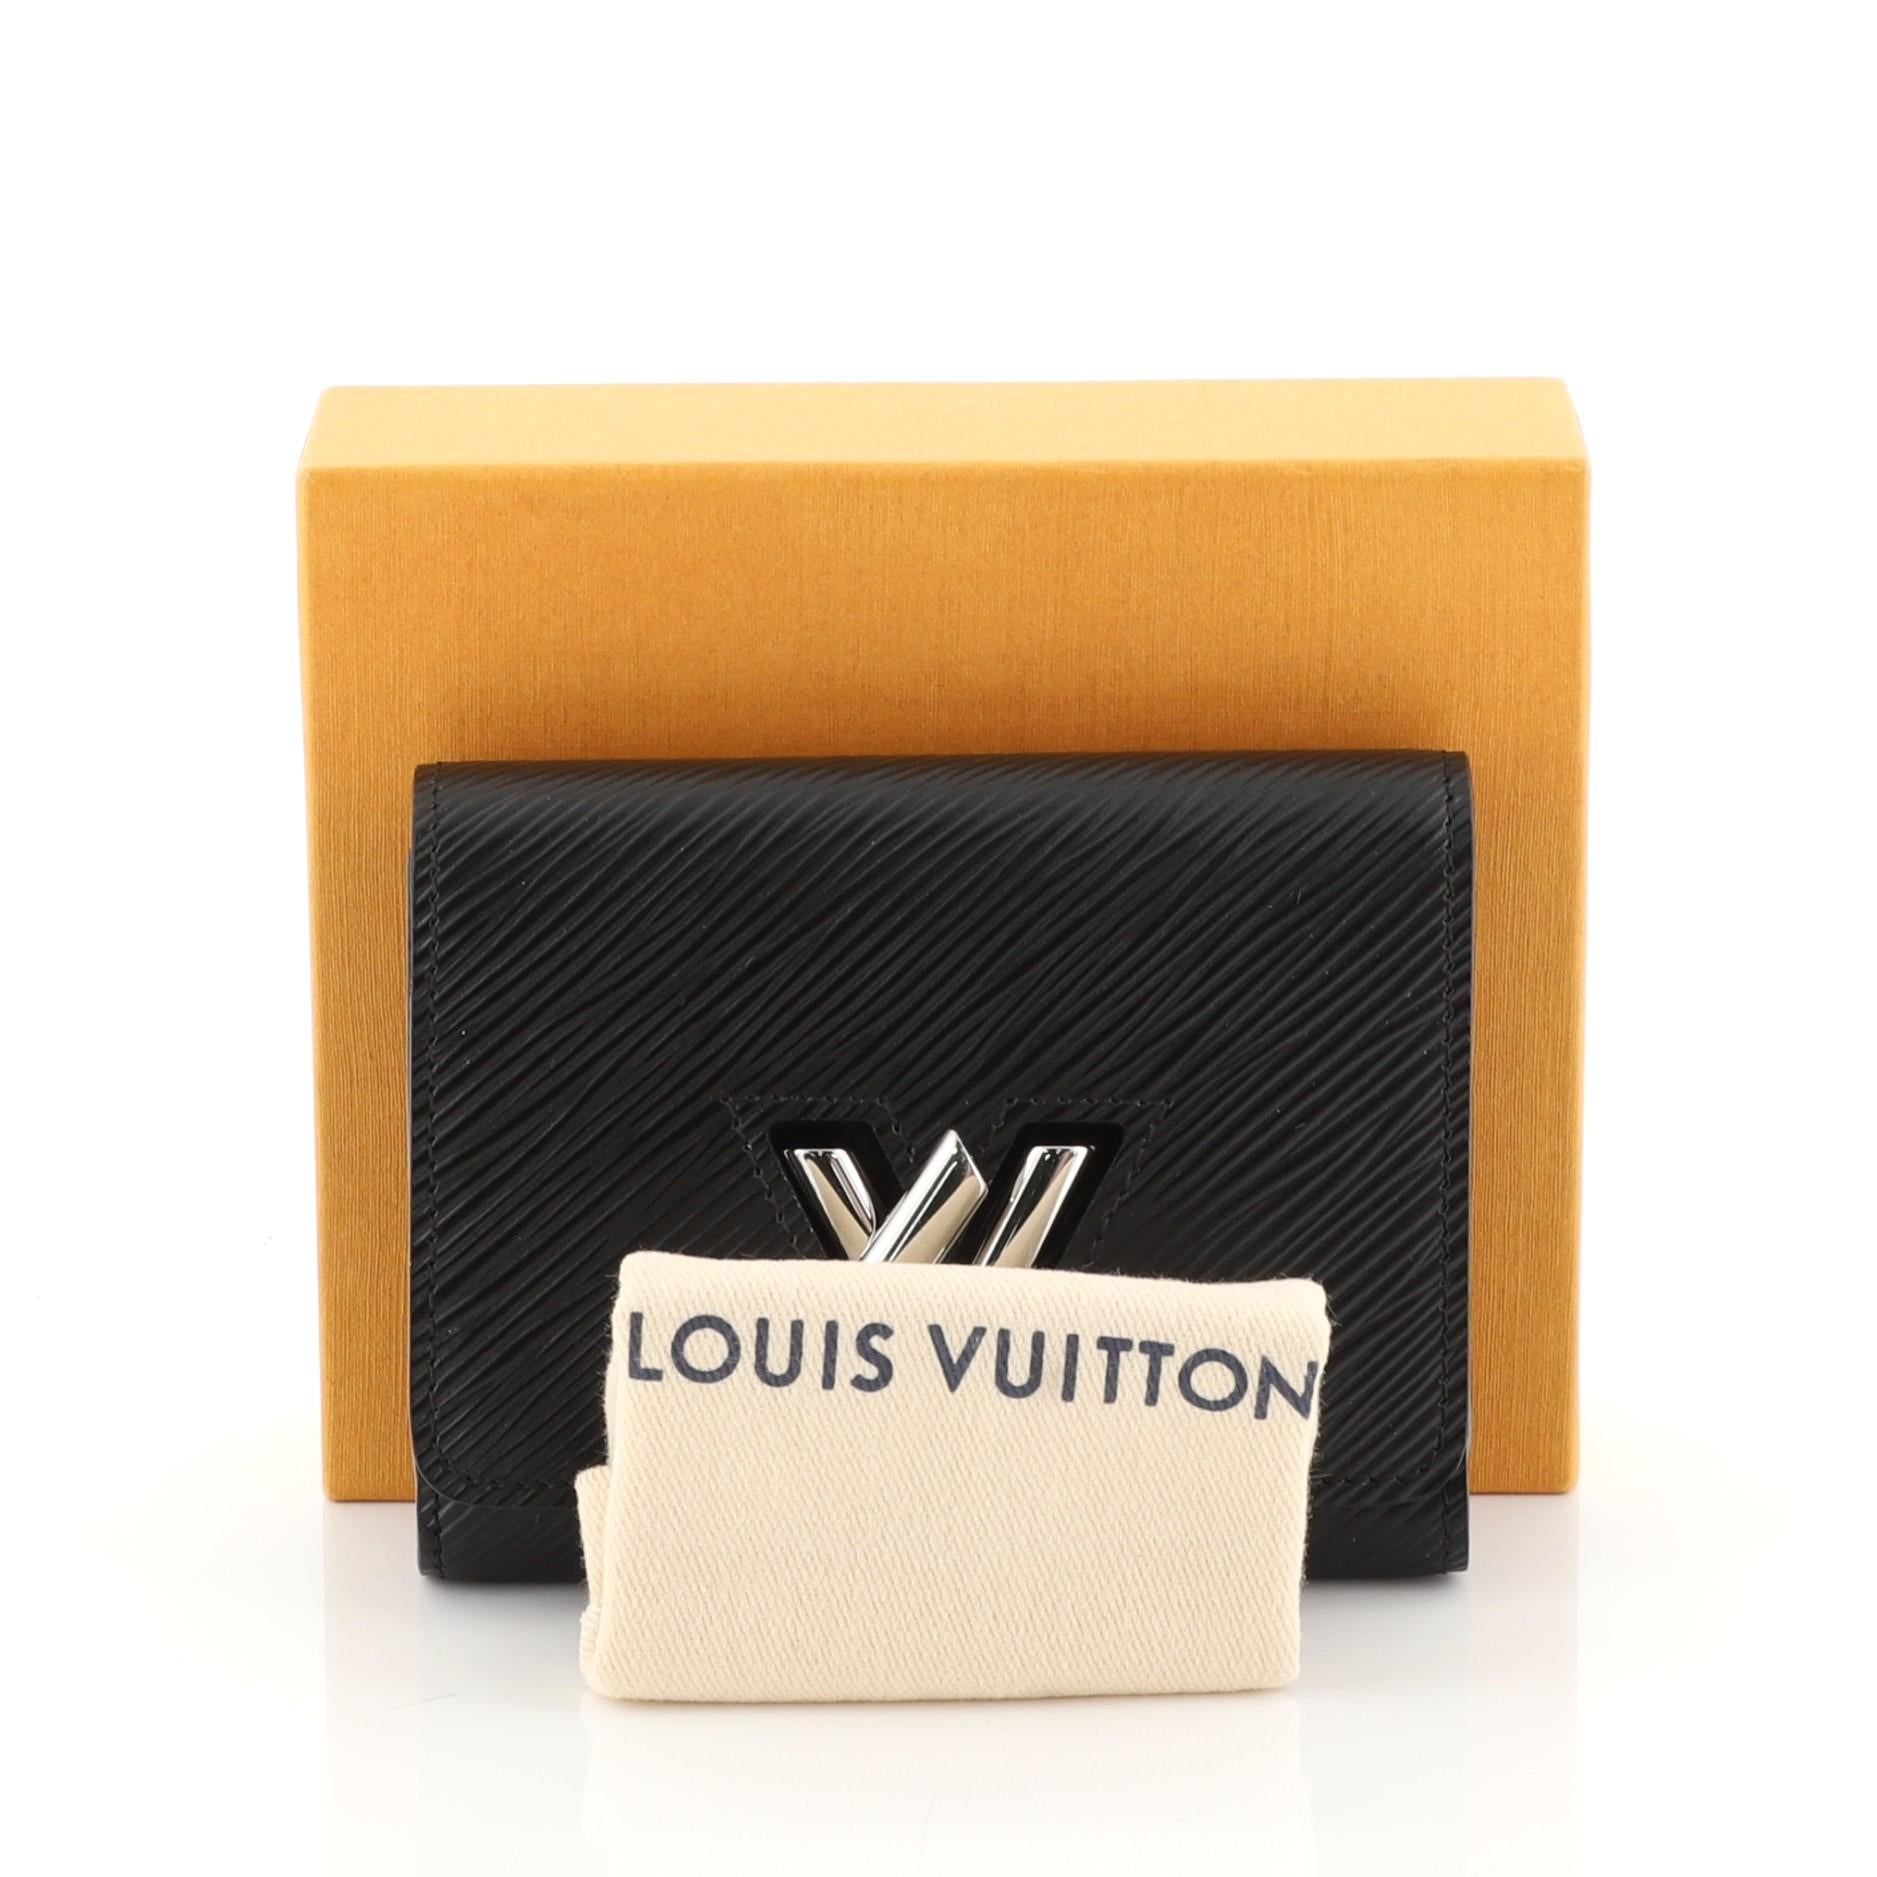 This Louis Vuitton Twist Wallet Epi Leather Compact, crafted from black epi leather, features silver-tone hardware. Its flap with LV twist lock closure opens to a black leather interior with multiple card slots and zip and slip pockets. Authenticity